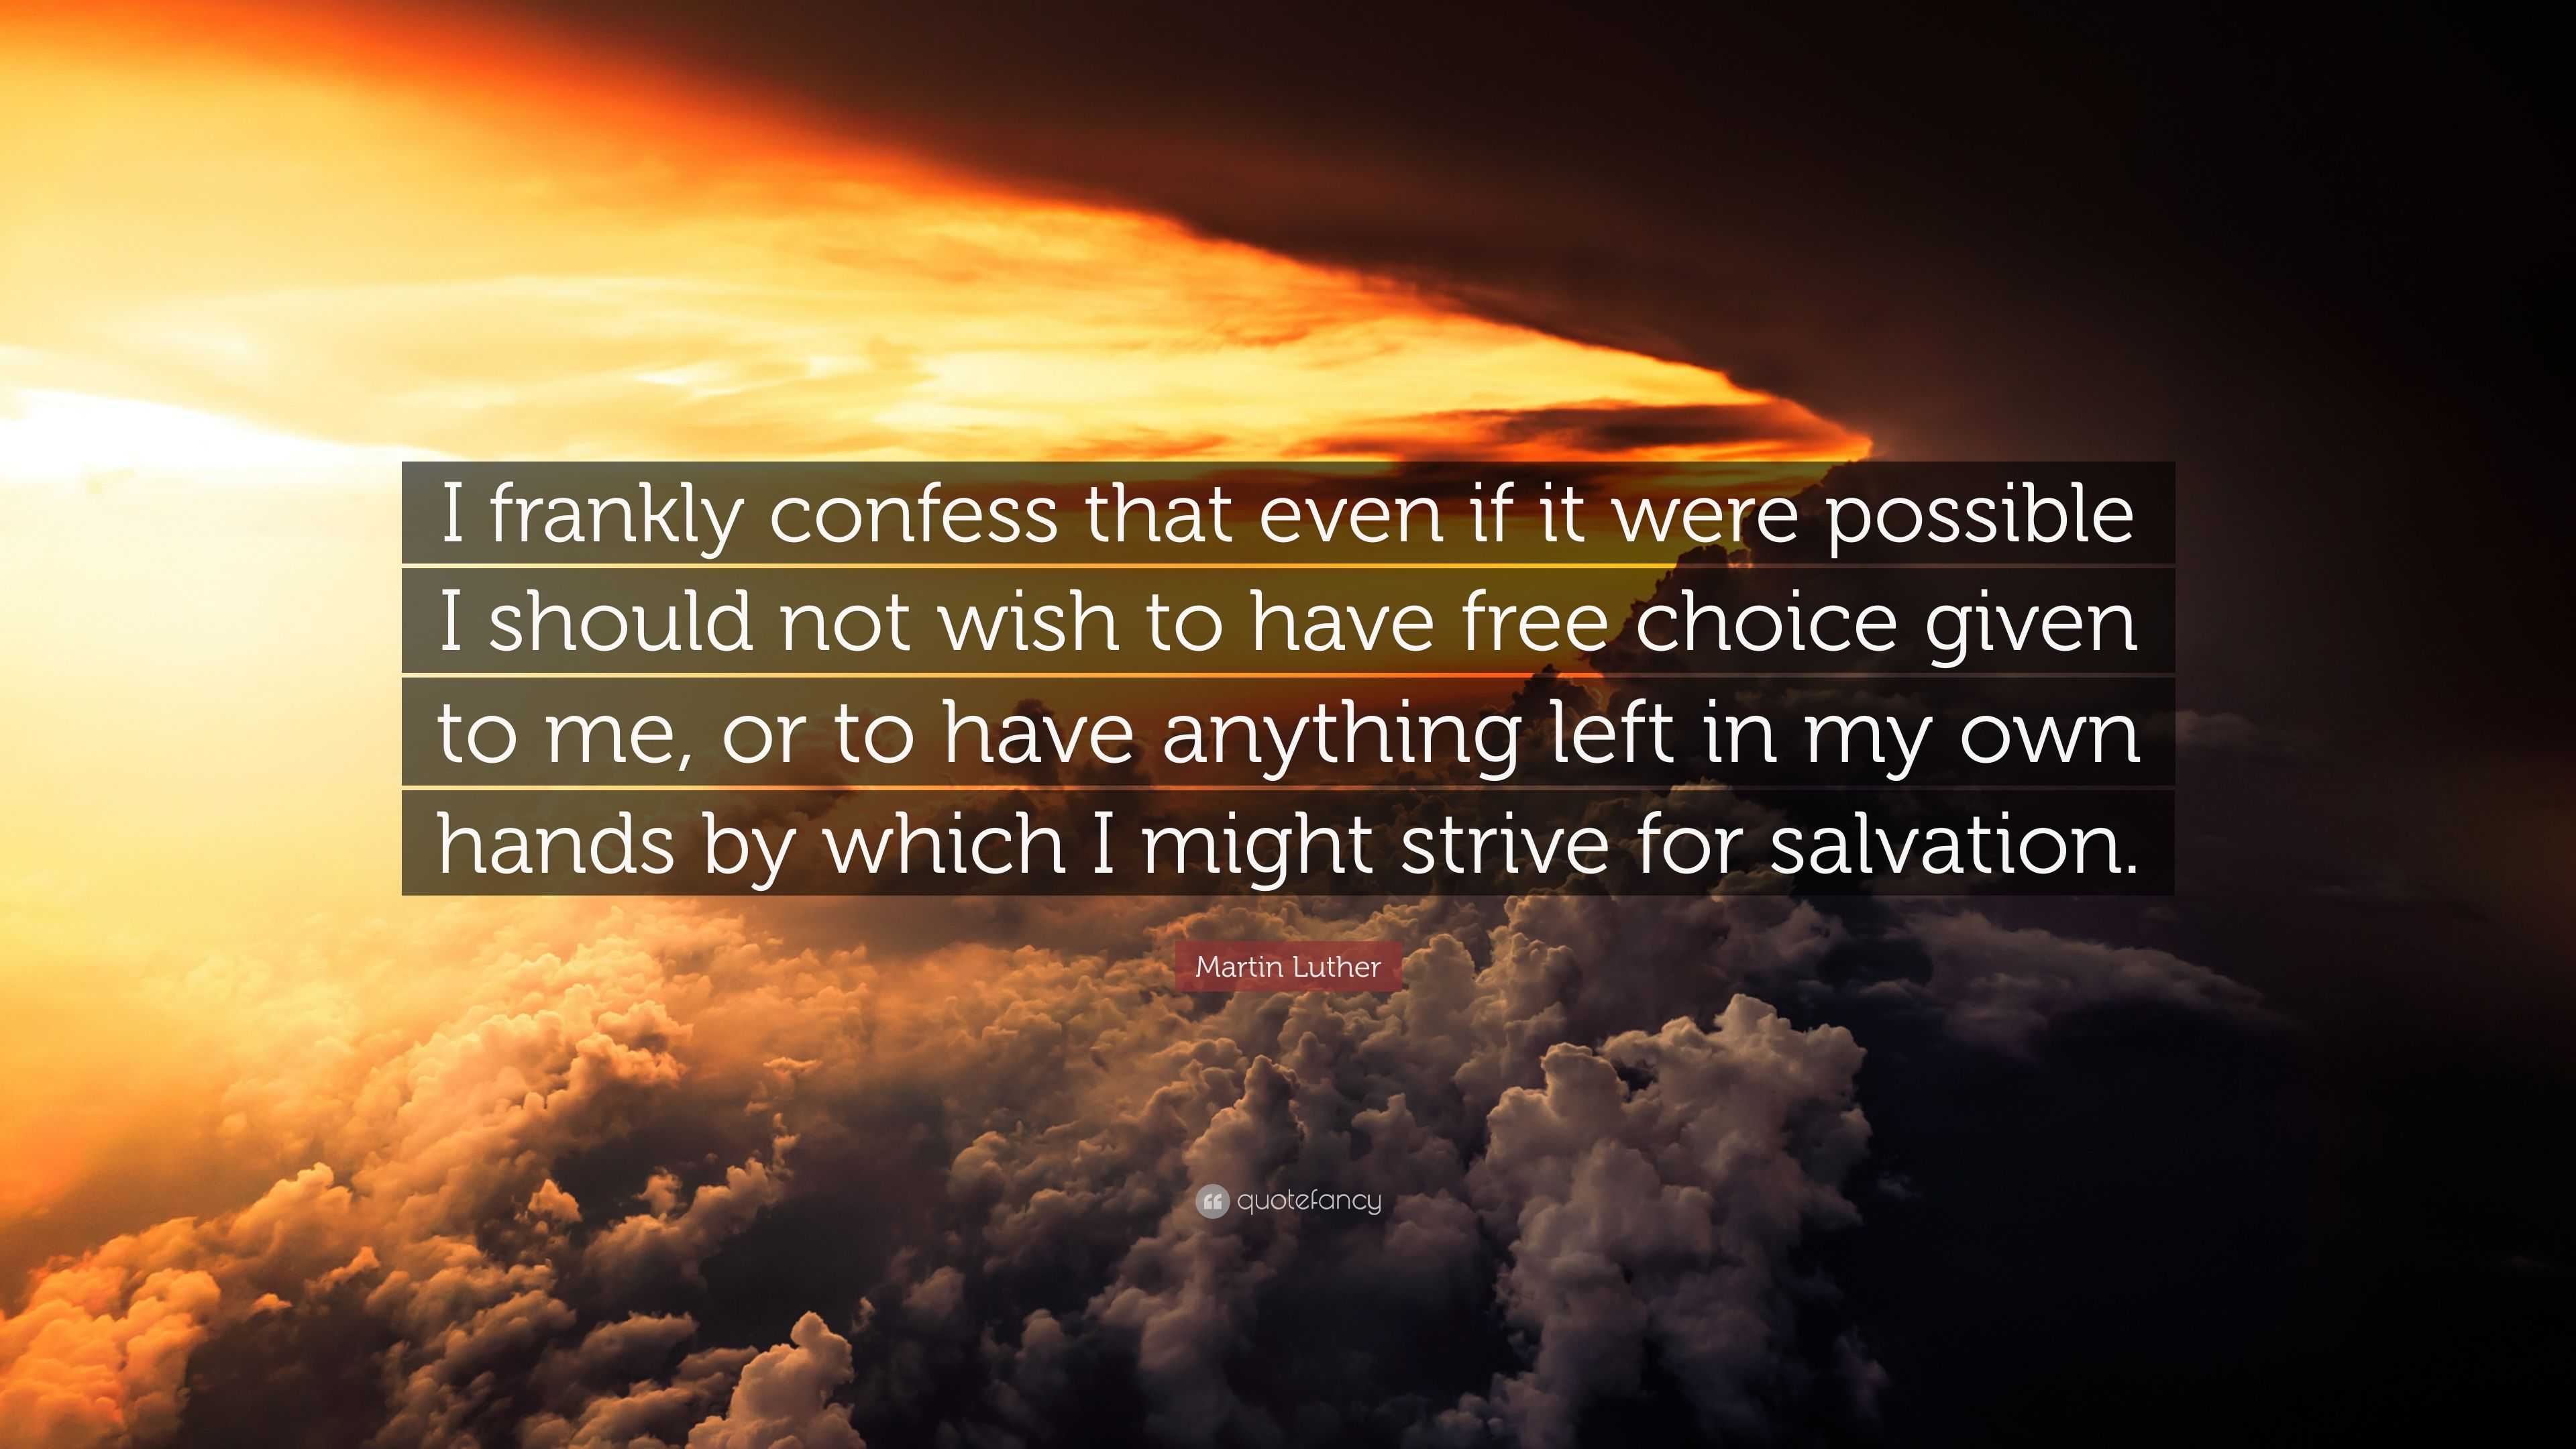 Martin Luther Quote: “I frankly confess that even if it were possible I  should not wish to have free choice given to me, or to have anything l”